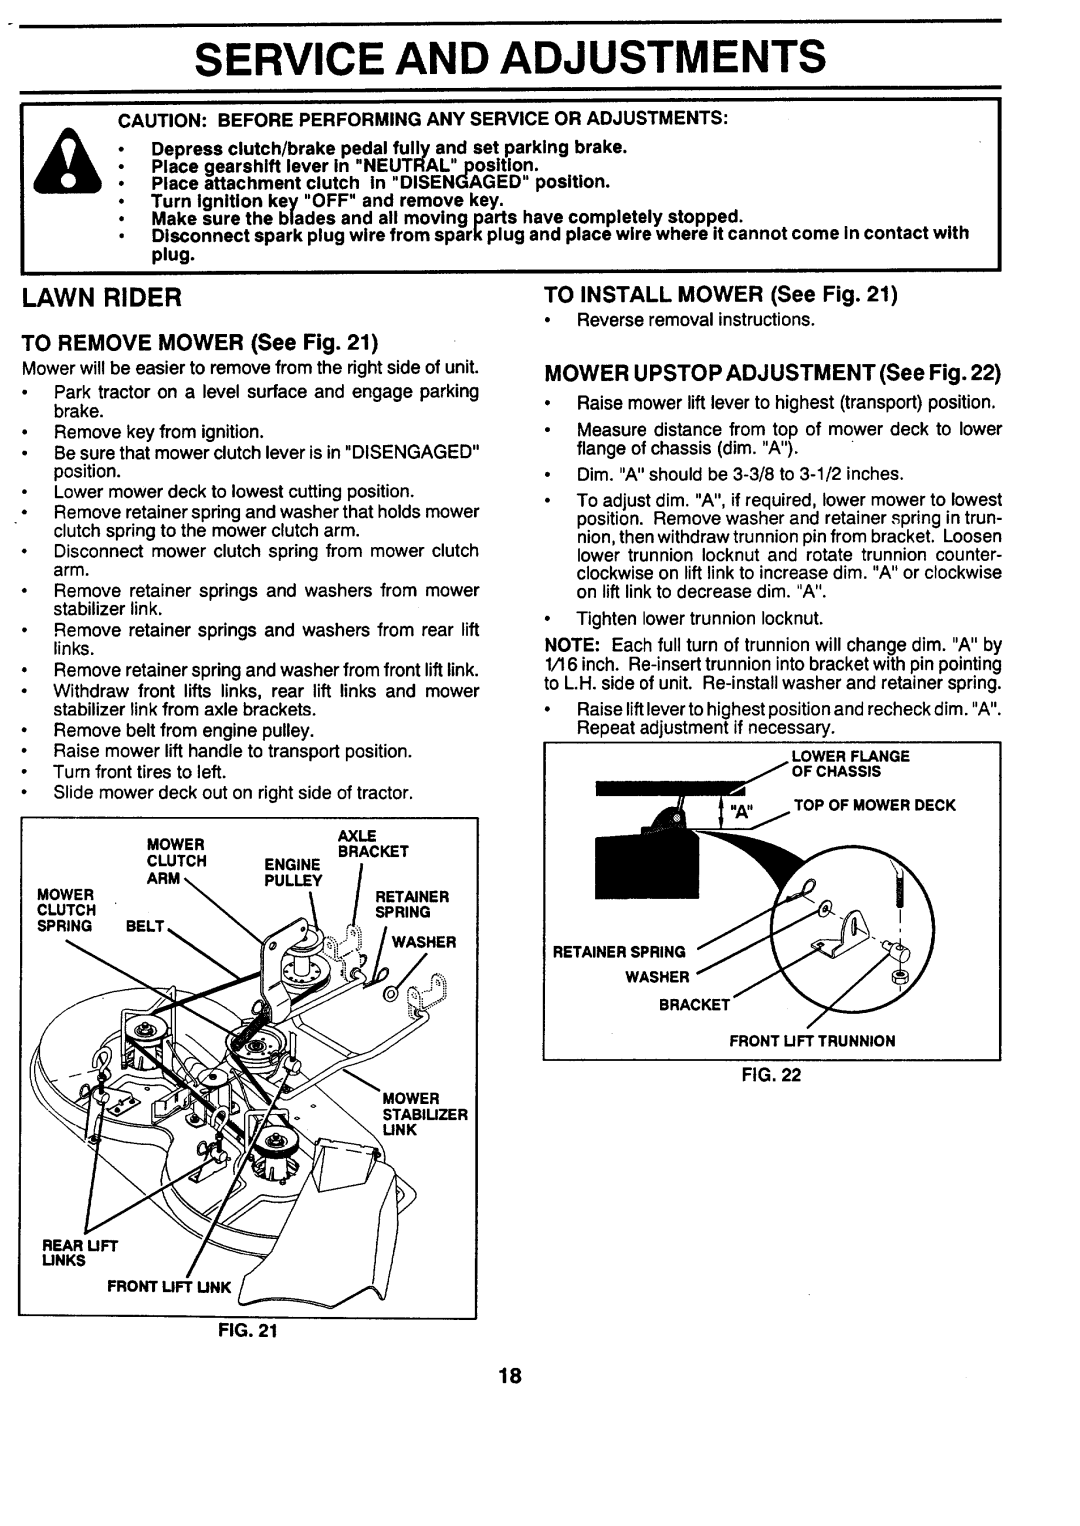 Sears 917.257462 manual Service And Adjustments, Lawn Rider, TO REMOVE MOWER See Fig, TO INSTALL MOWER See Fig 